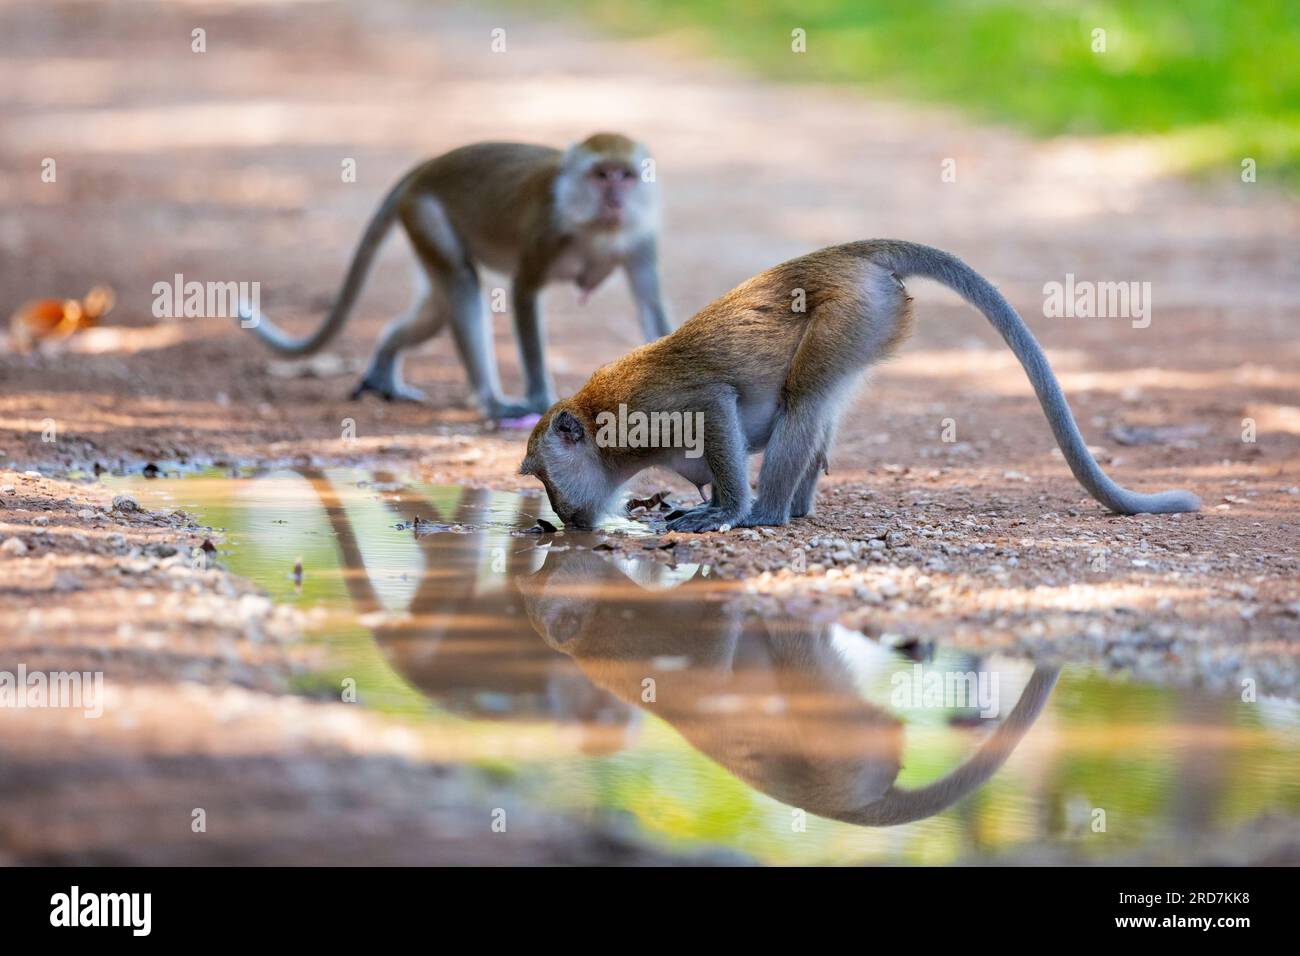 A long-tailed macaque drinks water from a muddy puddle on a dirt trail, Singapore Stock Photo